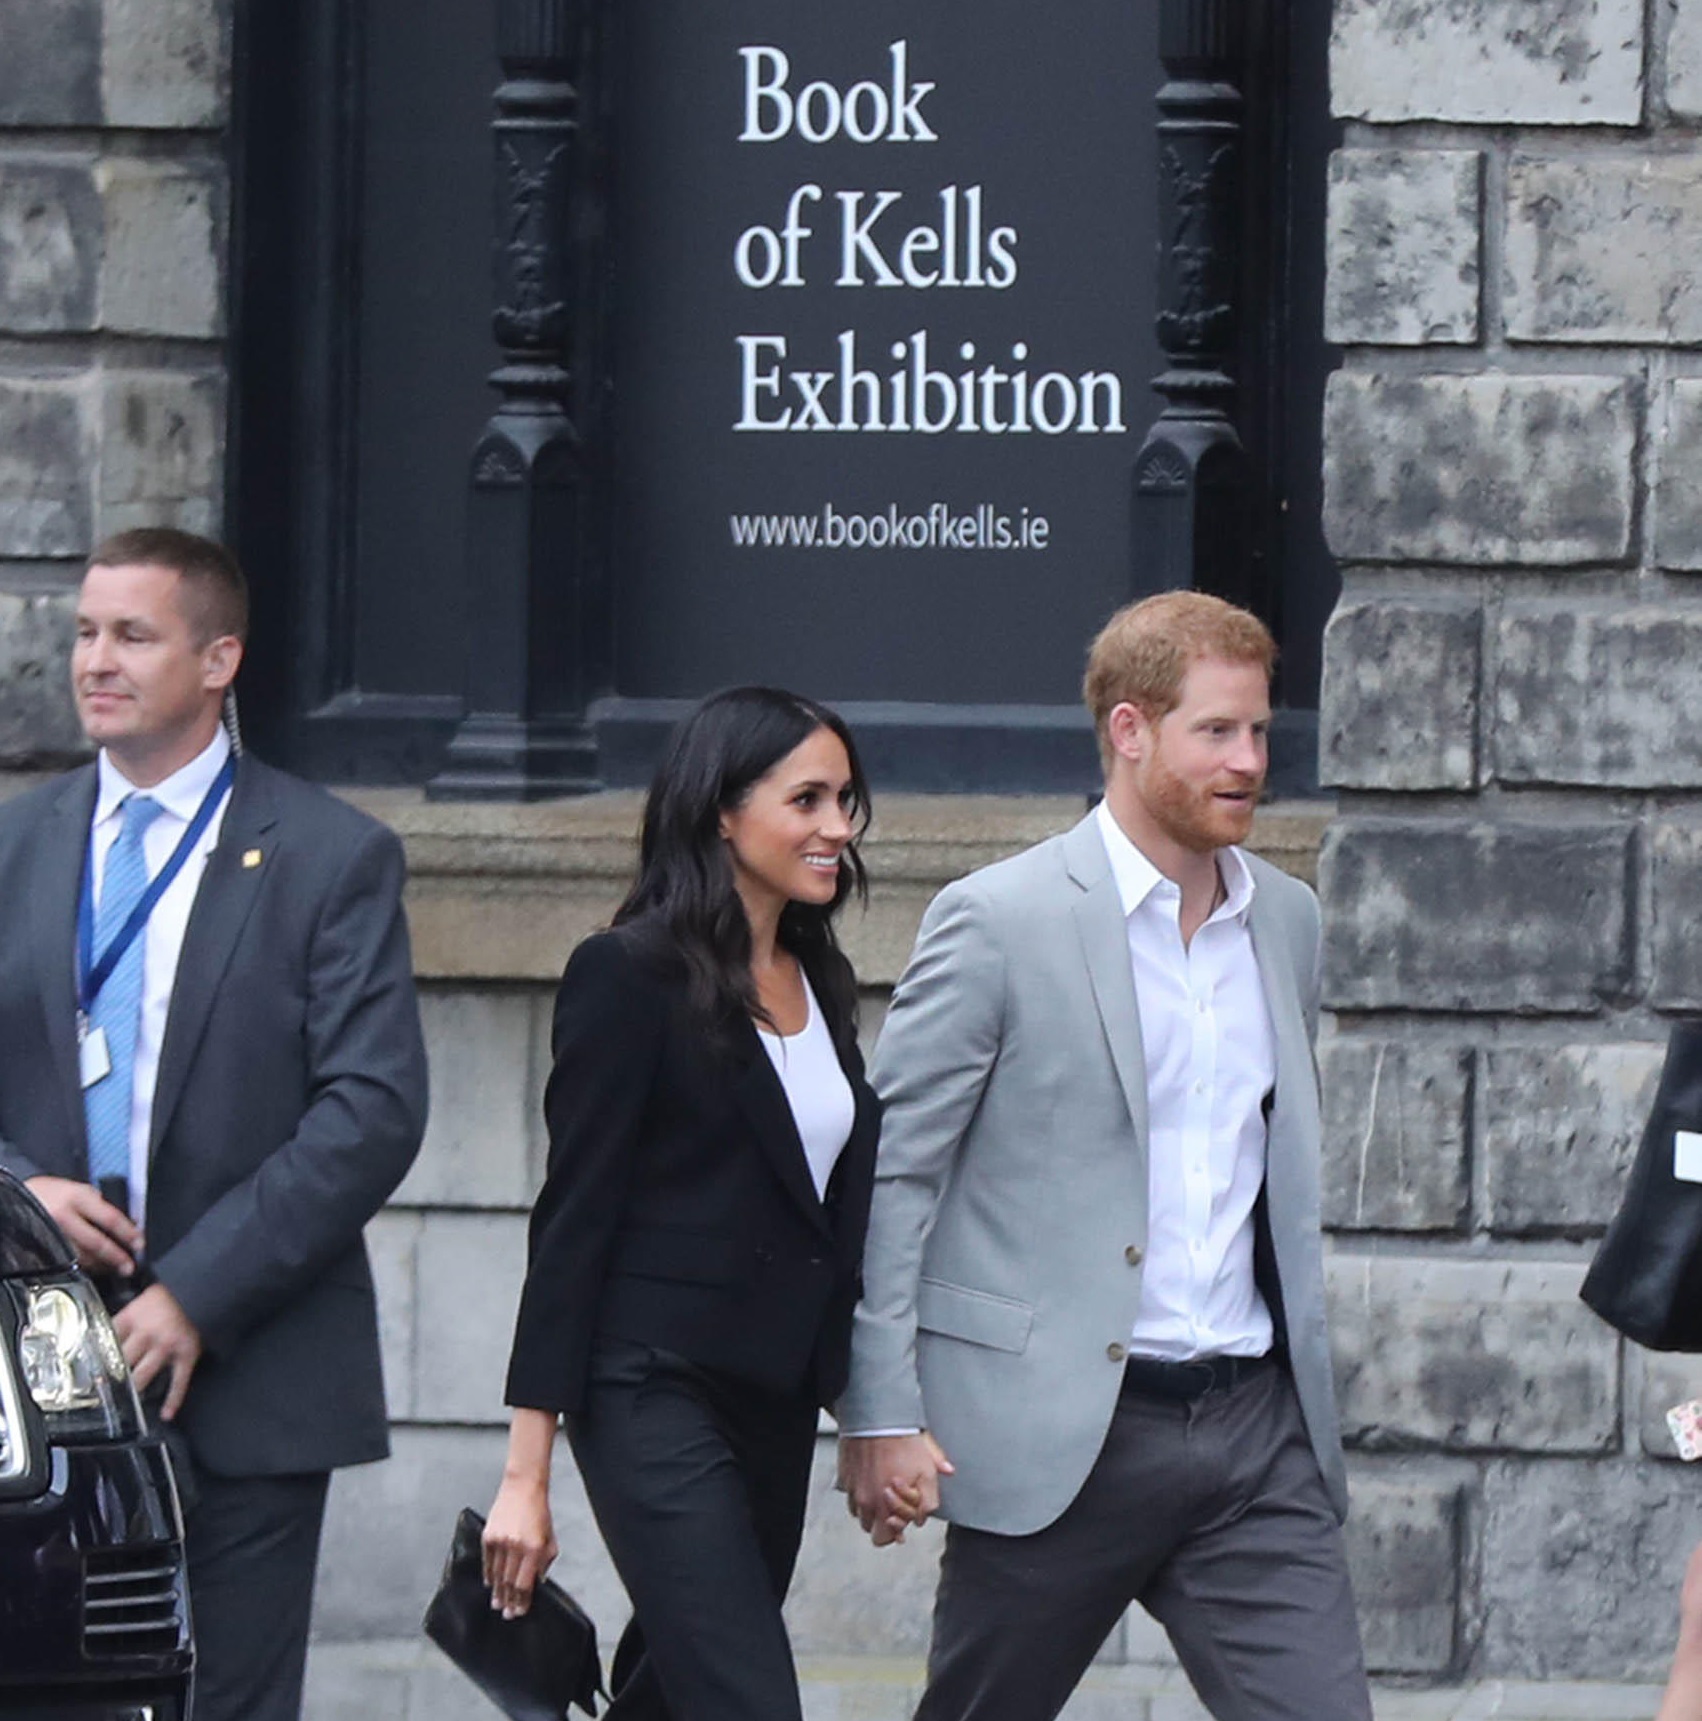  Britain's Prince Harry and Meghan Markle arrive at the Book of Kells exhibition at Trinity College during their visit to Dublin in July 2018